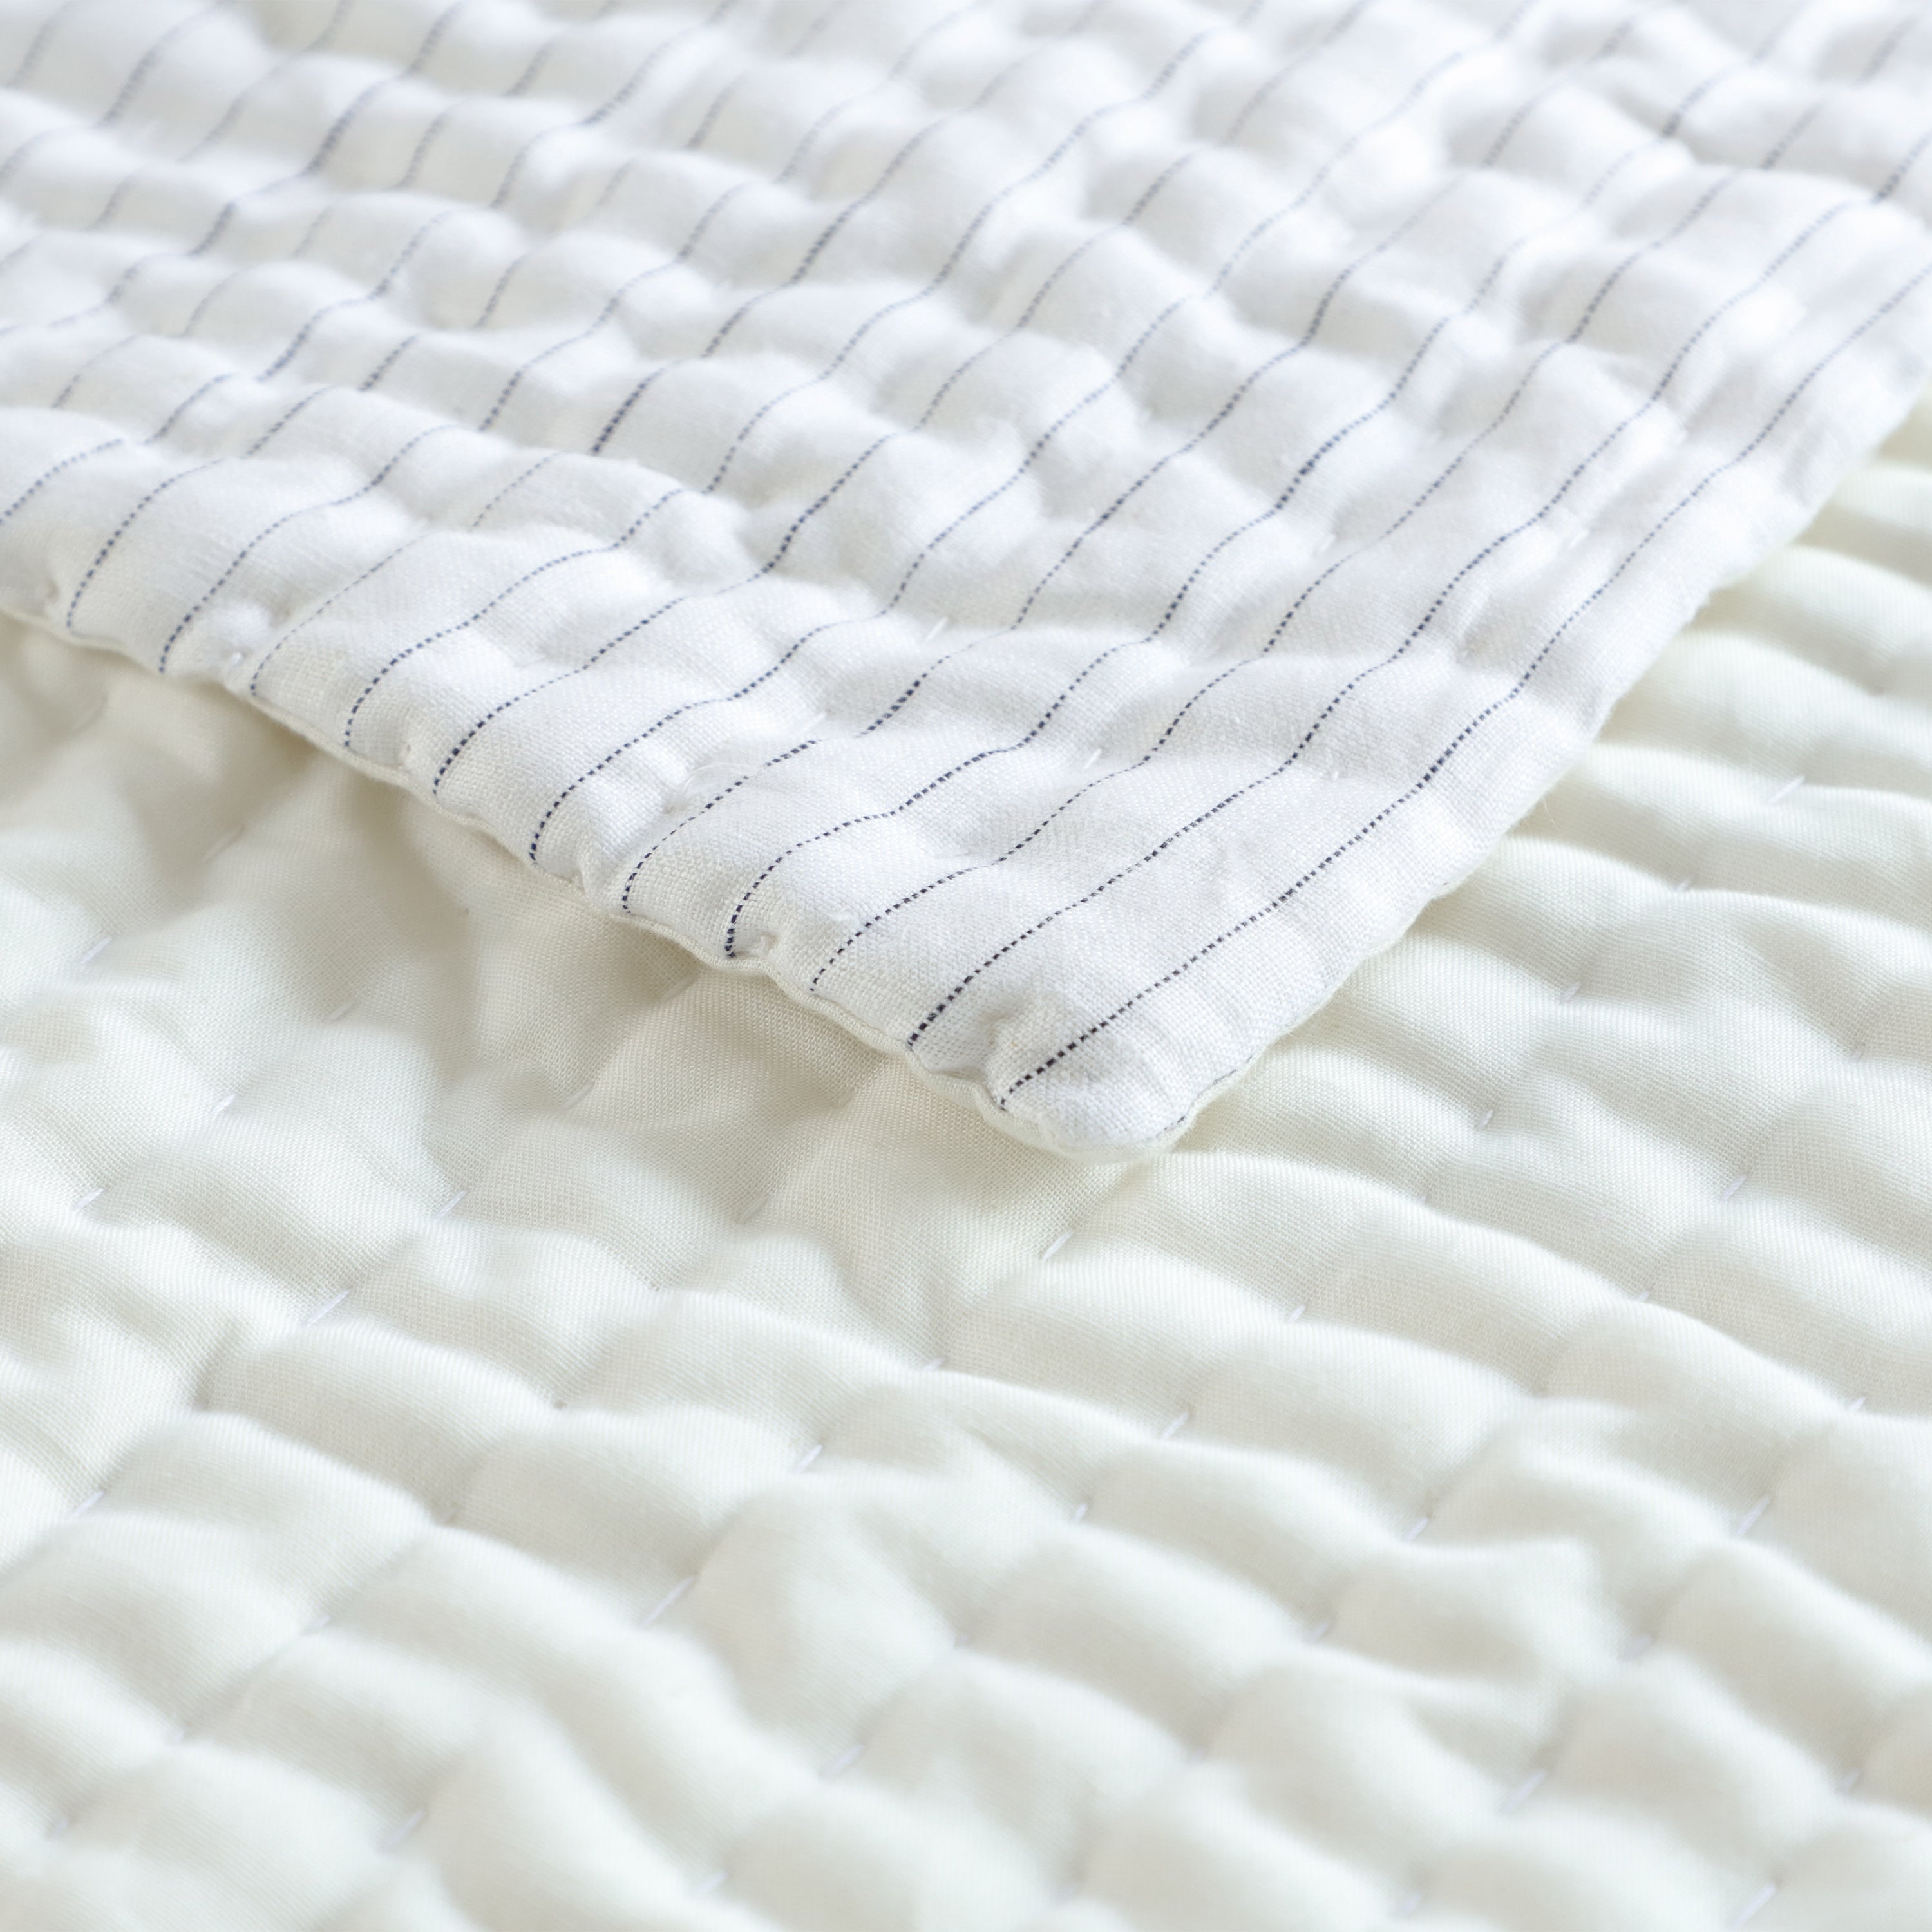 Linen quilt has stitches in similar ivory color. The quilt reverses to ivory cotton and has breathable cotton batting.